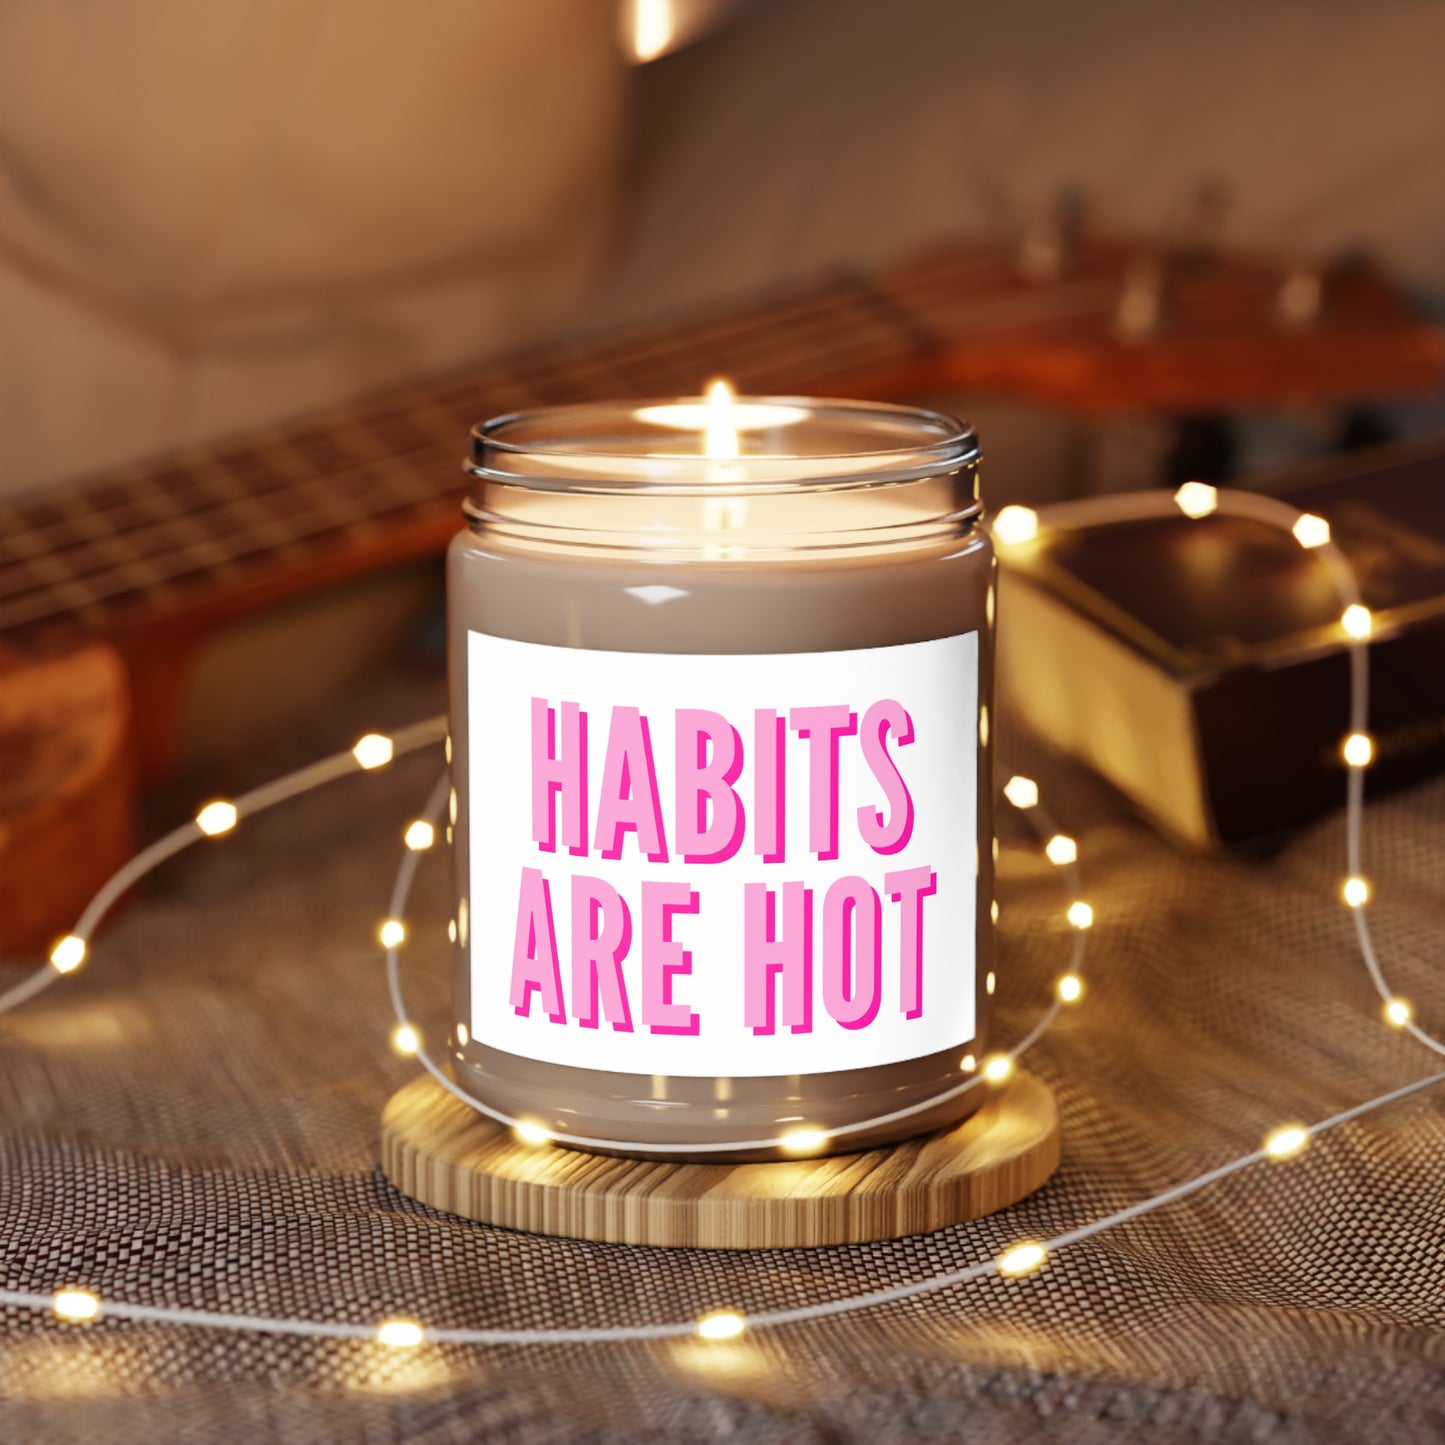 Habits Are Hot Candle